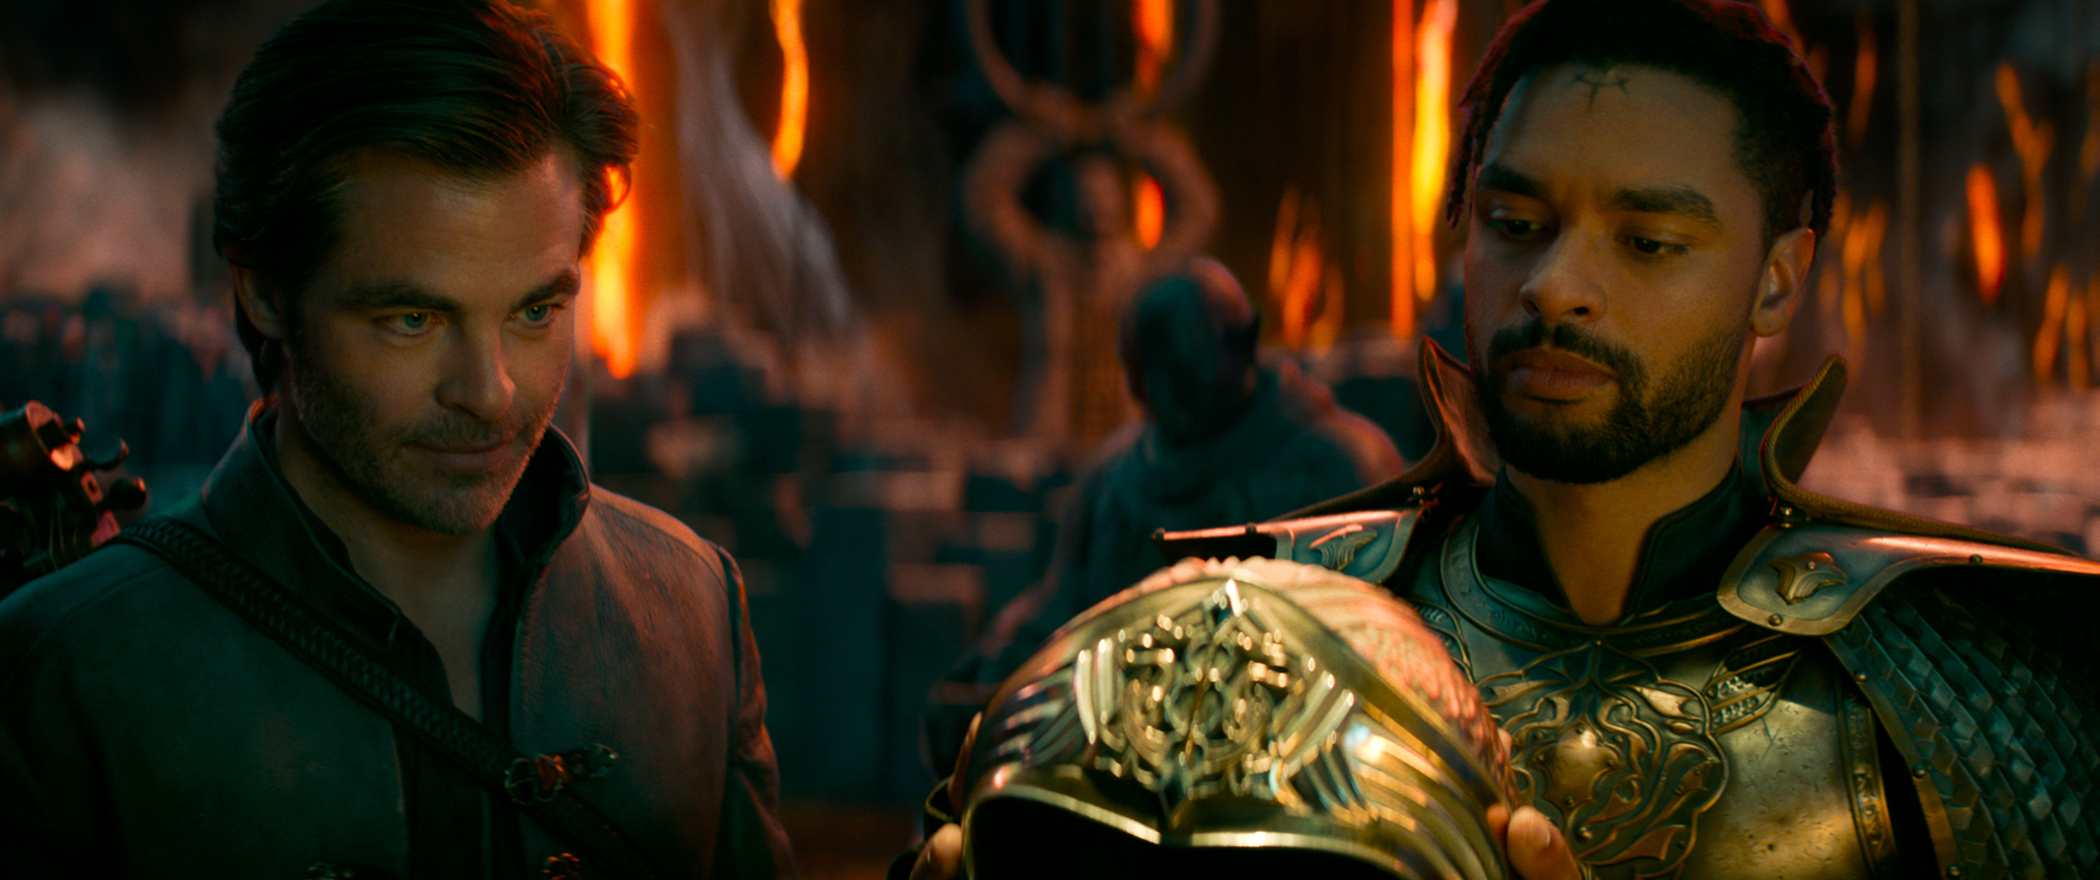 Chris Pine plays Edgin and Regé-Jean Page plays Xenk in Dungeons & Dragons: Honor Among Thieves from Paramount Pictures.